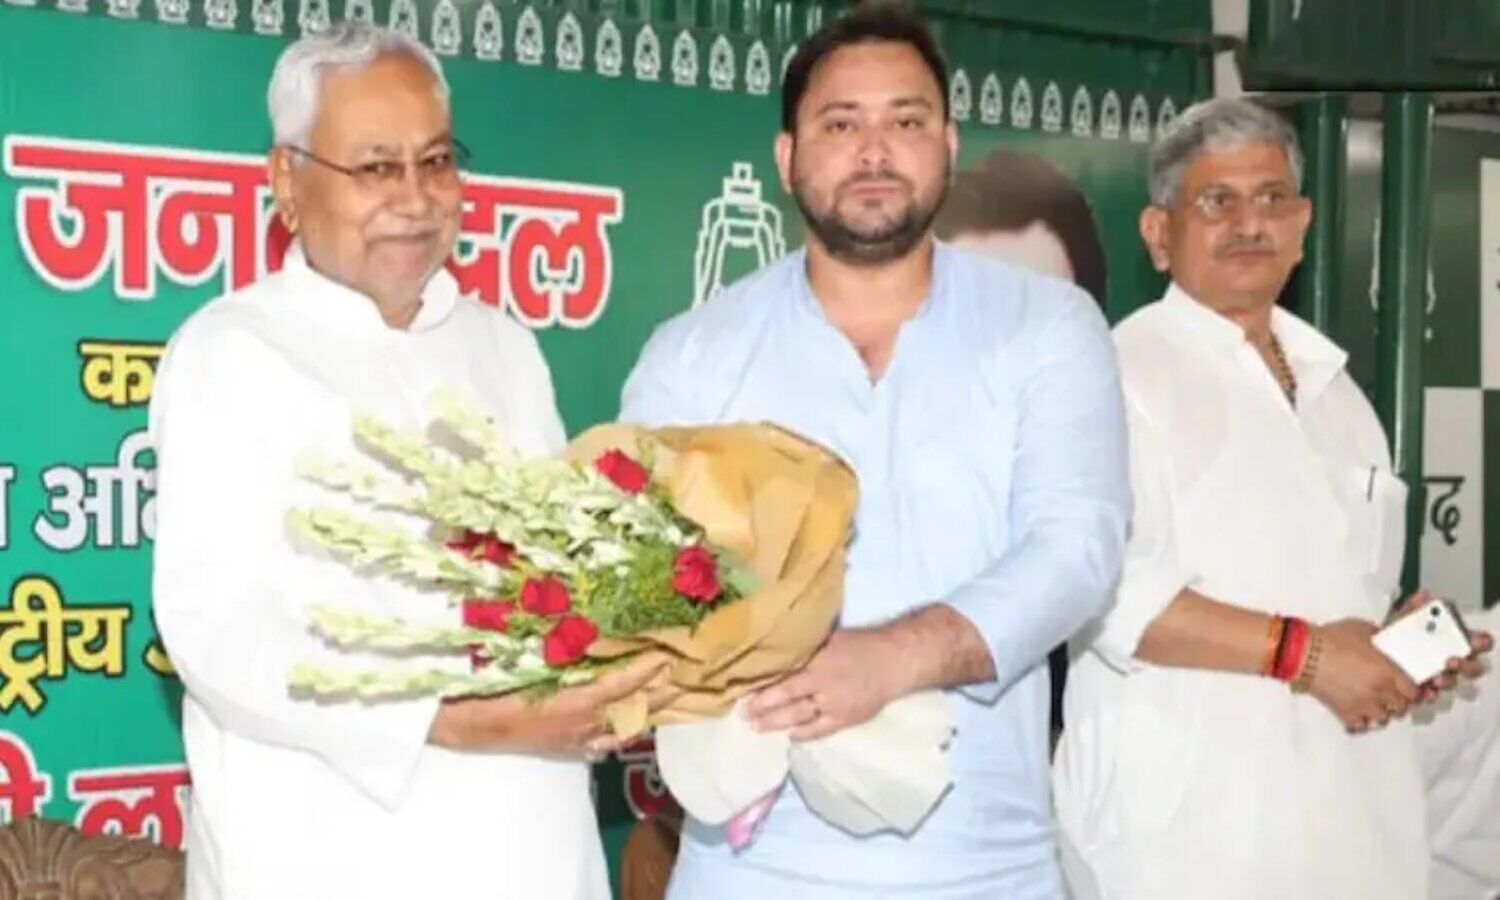 Bihar Political Crisis: Uncle-nephew government again in Bihar, Nitish will take oath of CM for the 8th time today, Tejashwi will be Deputy CM